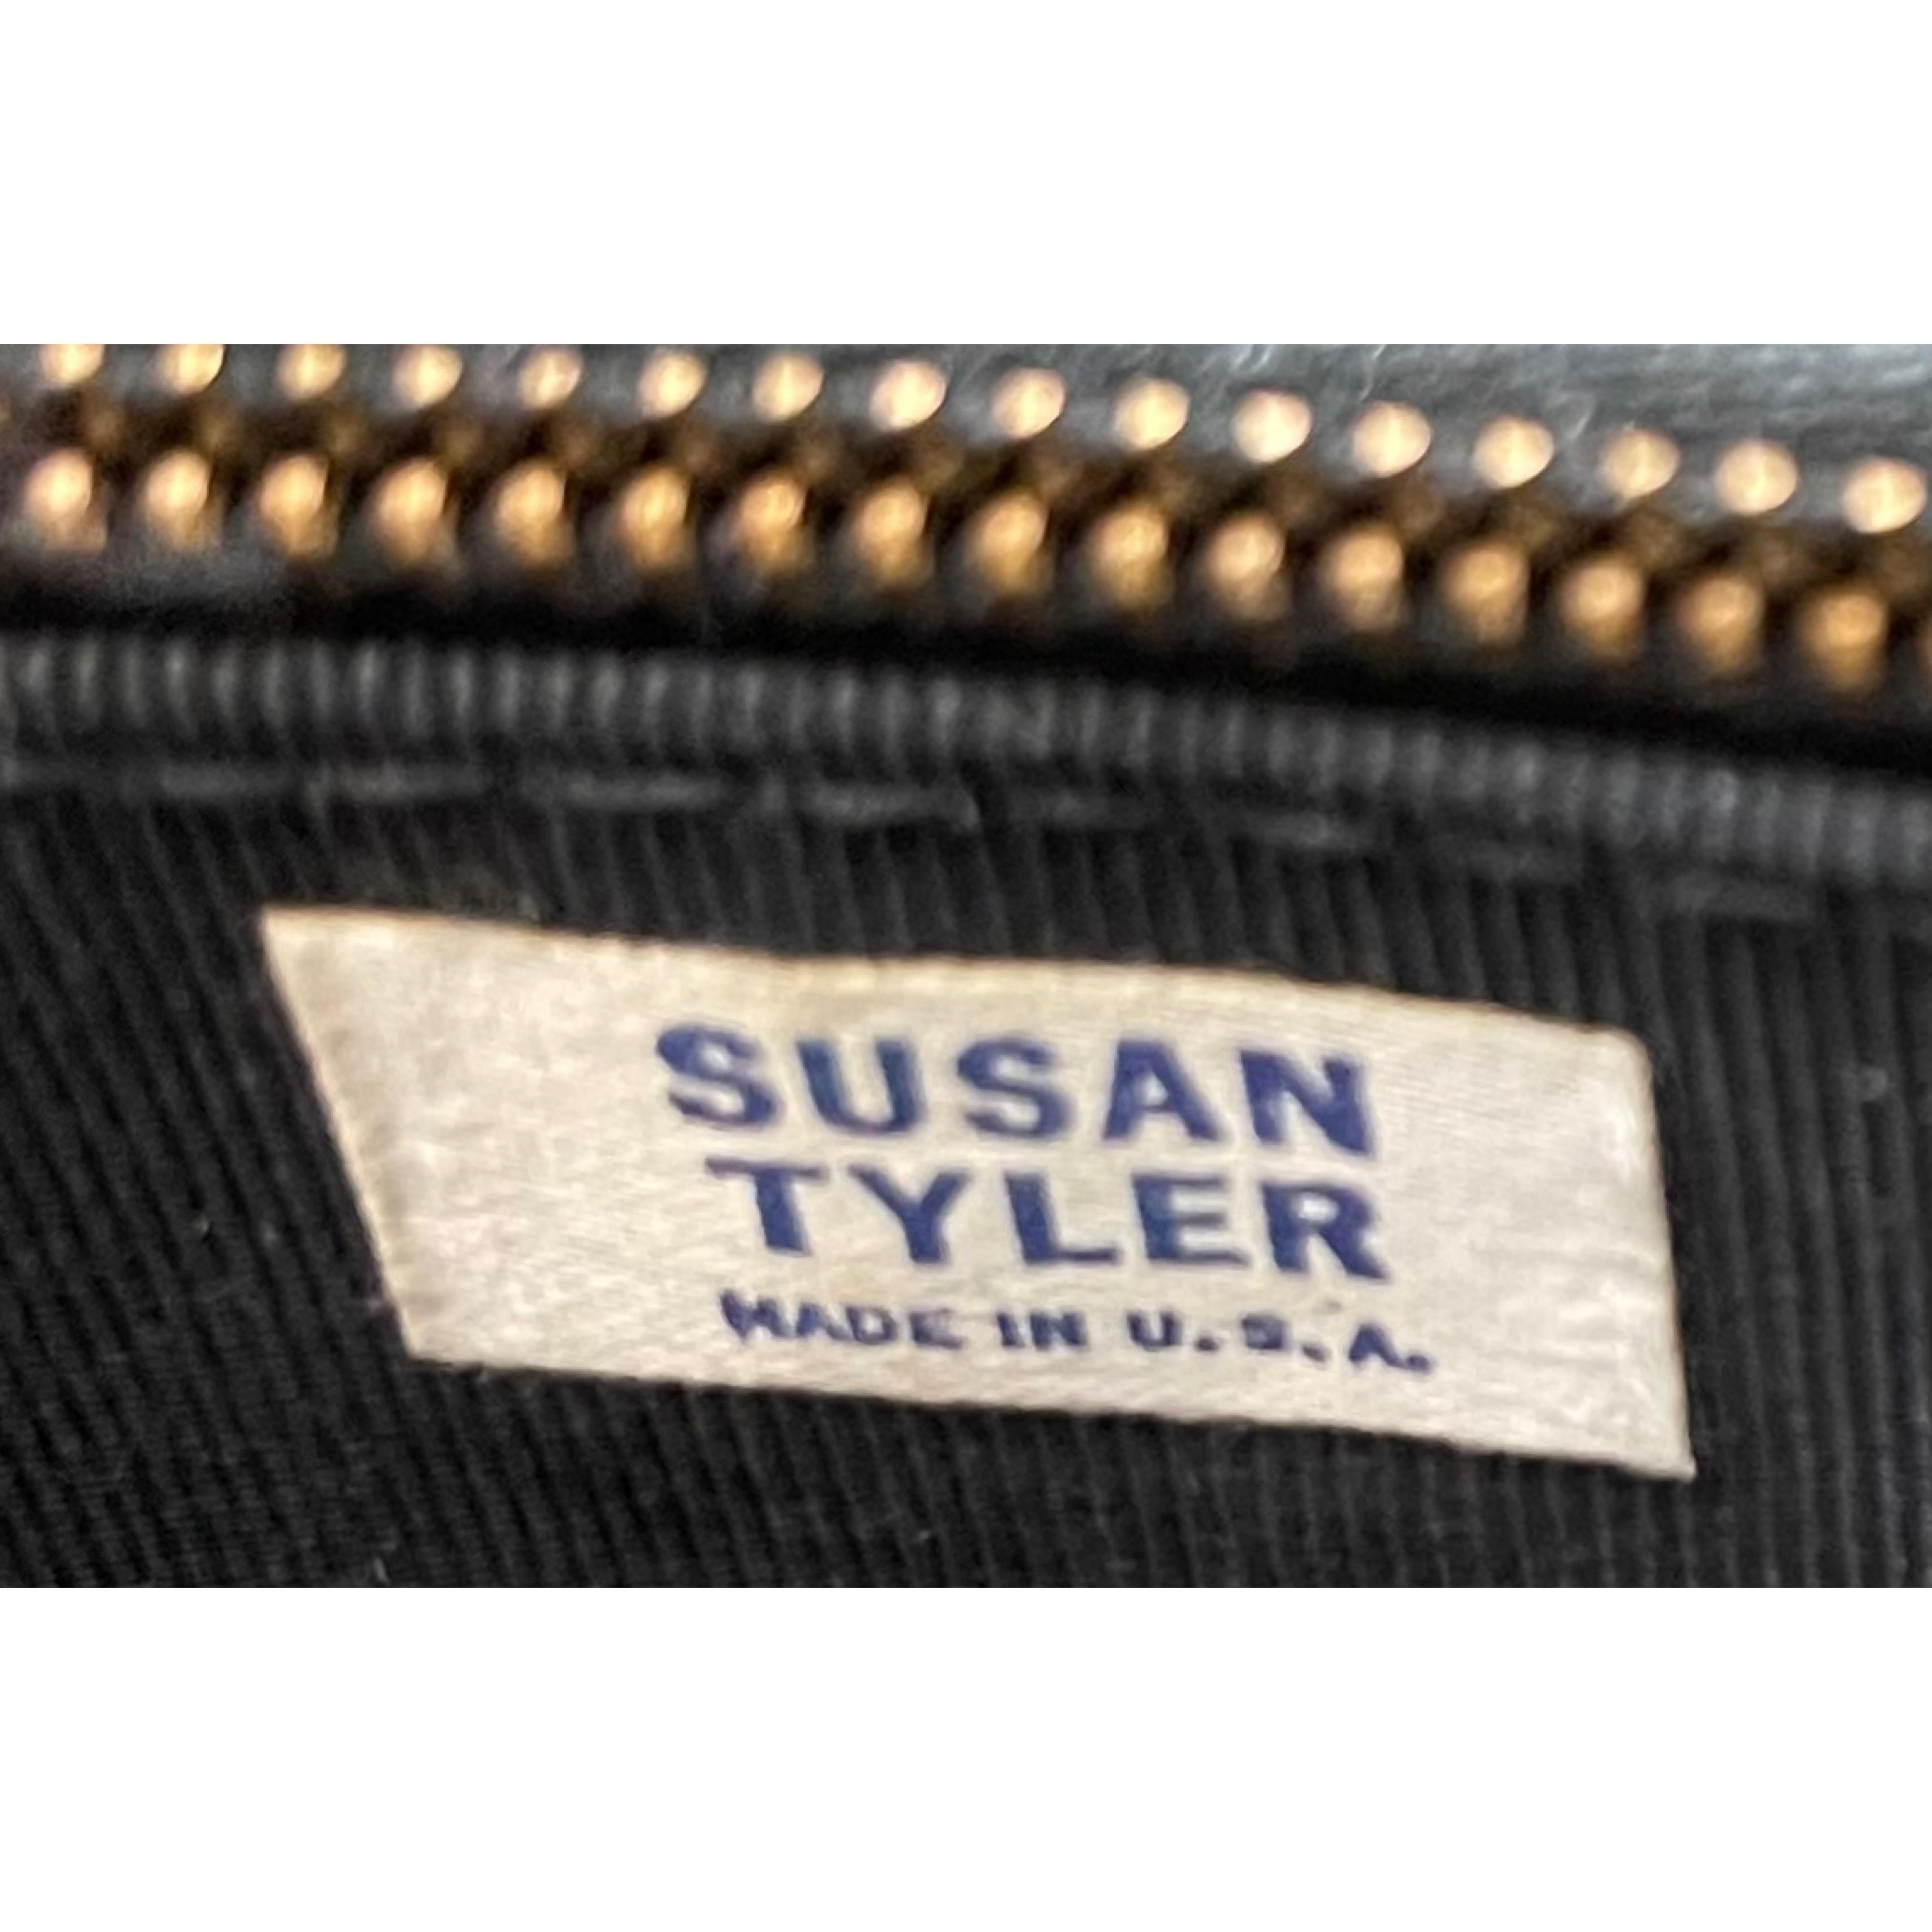 Chic 1960s SUSAN TYLER black patent leather handbag ! This bag has it all—there are three different separate pouches attached to one another. Zipper pocket in the last pouch. Snaps closed. Gold top handle has a lion head on each side. Can fit so